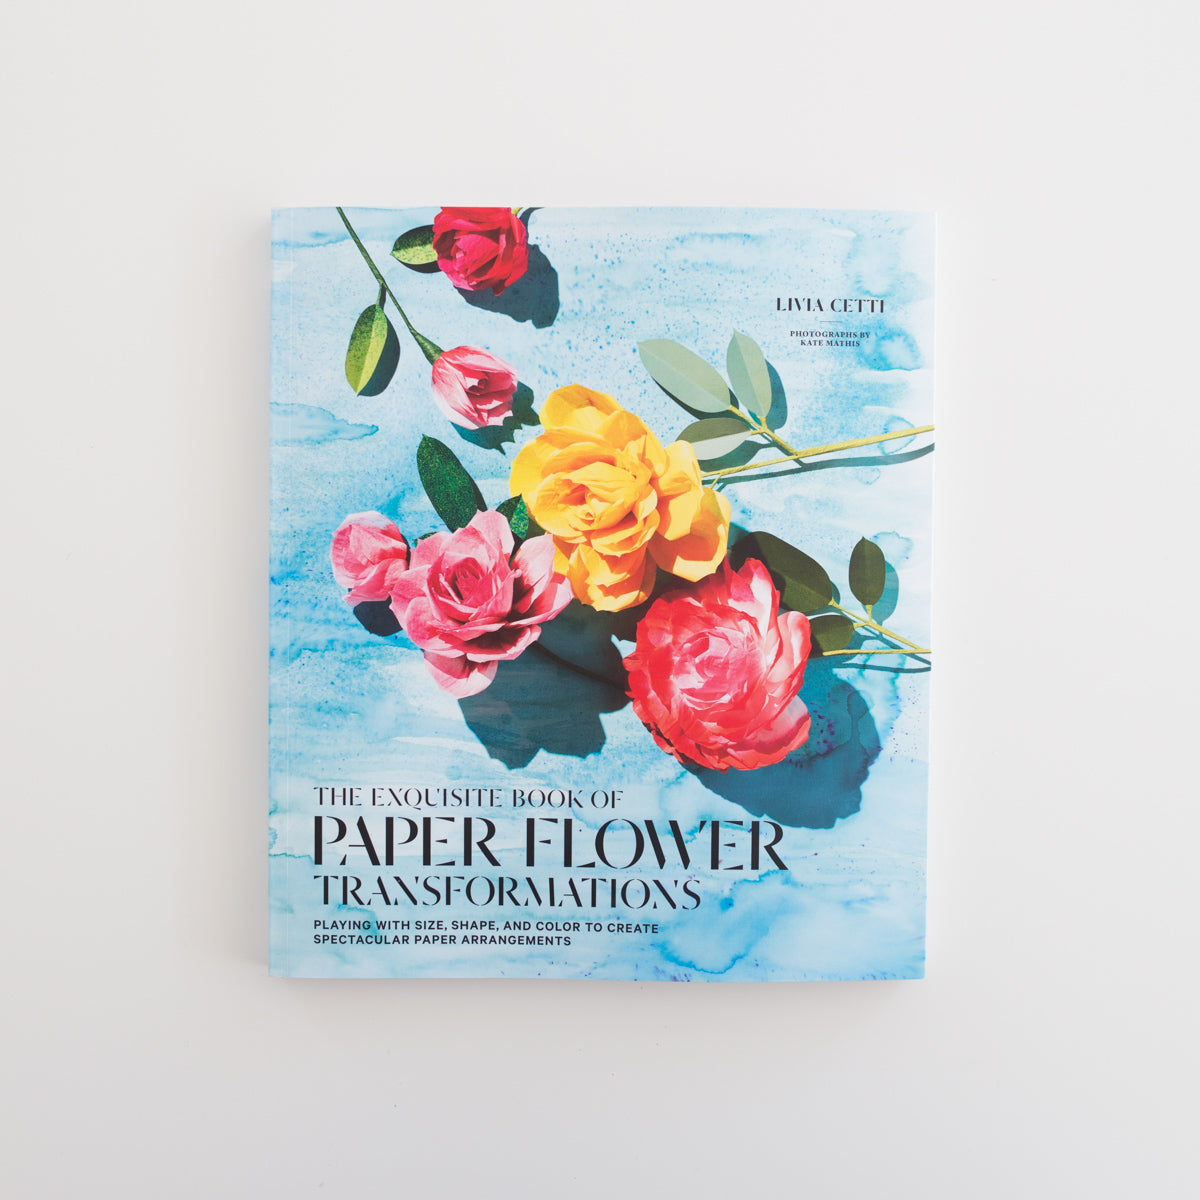 The Exquisite Book of Paper Flowers Transformations' by Livia Cetti